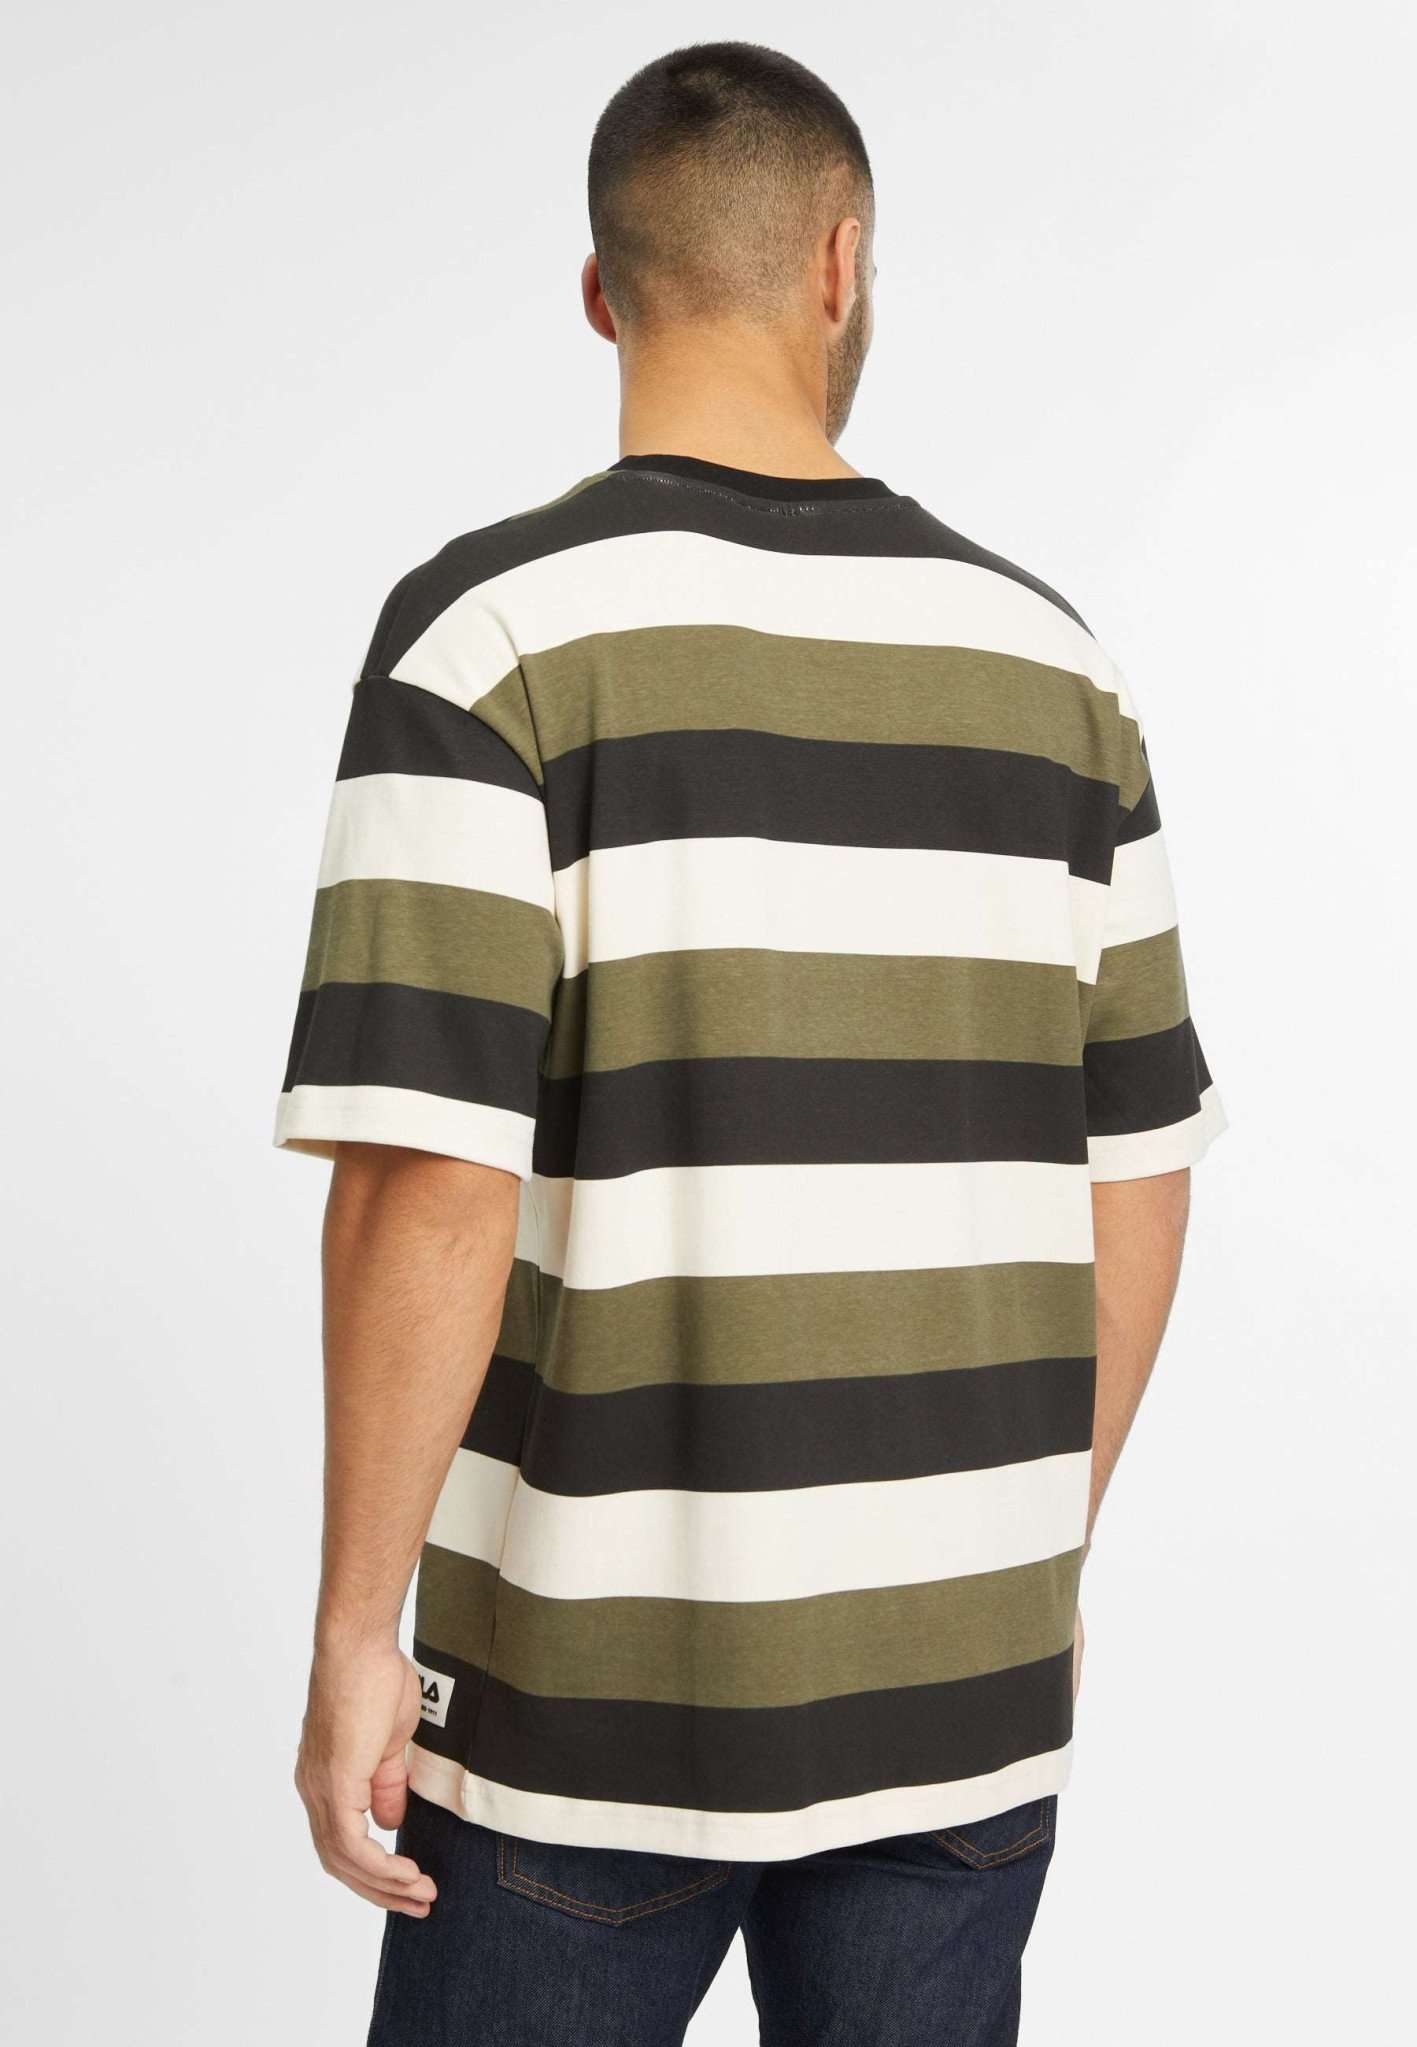 Taichung in Olive Night Striped T-Shirts Fila   